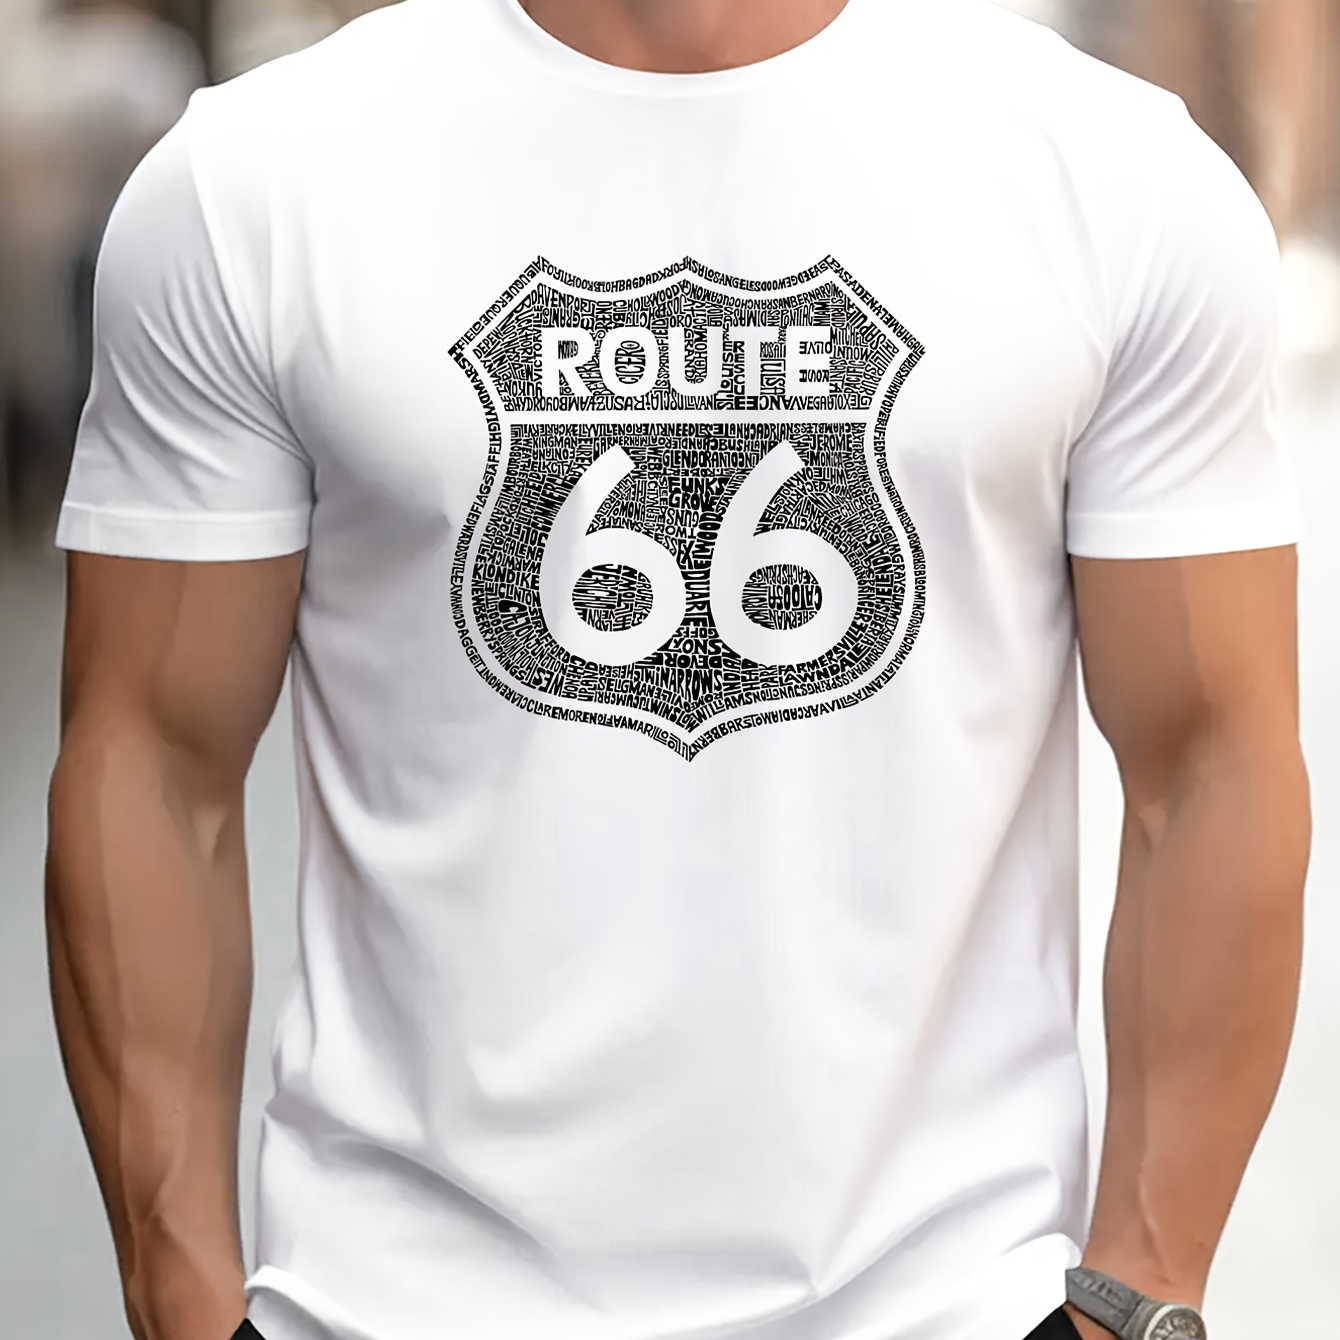 

Route 66 Print Tee Shirt, Tees For Men, Casual Short Sleeve T-shirt For Summer